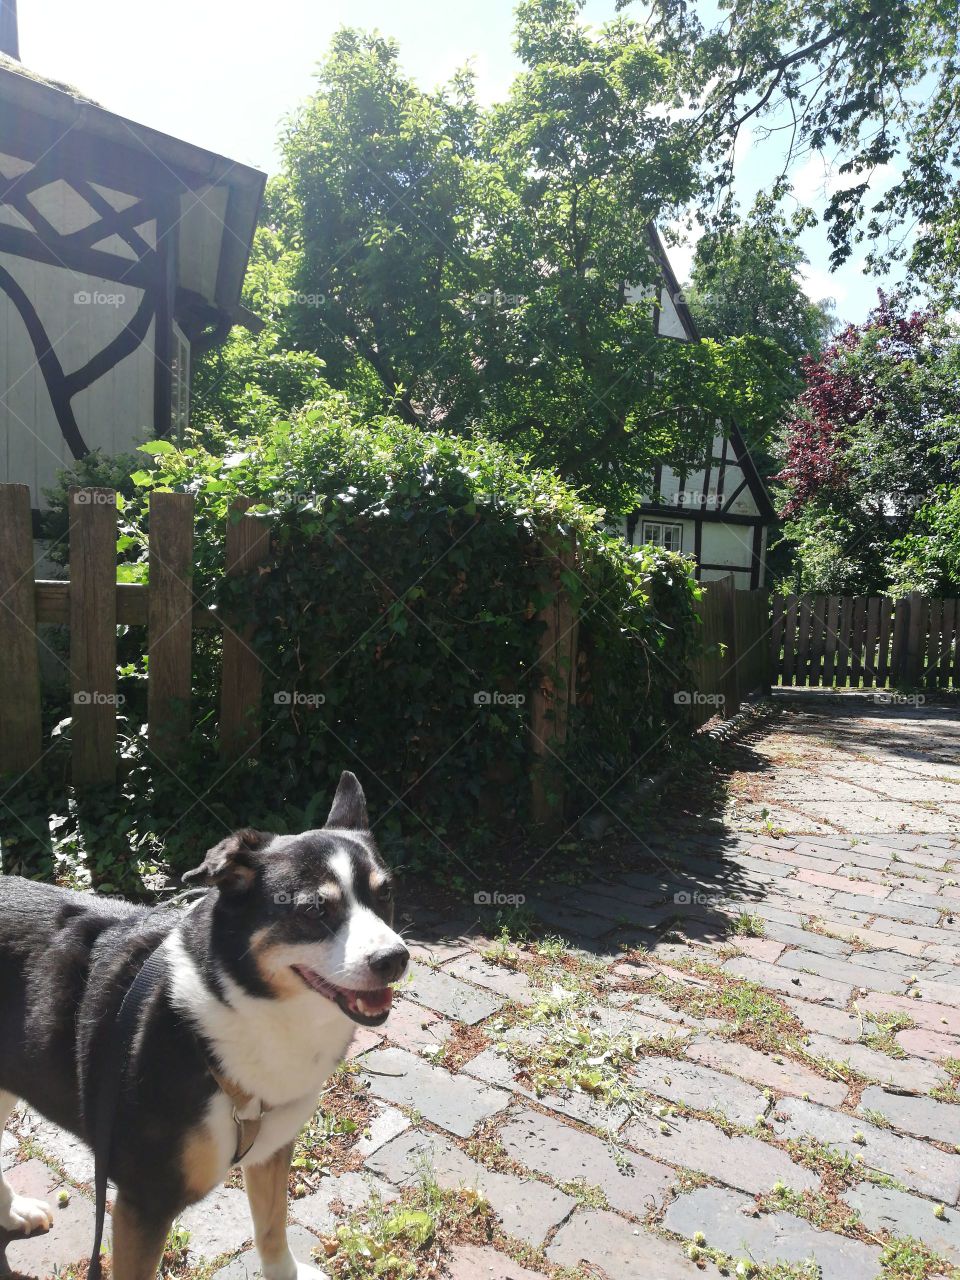 Dog standing in front of a house on a sunny day